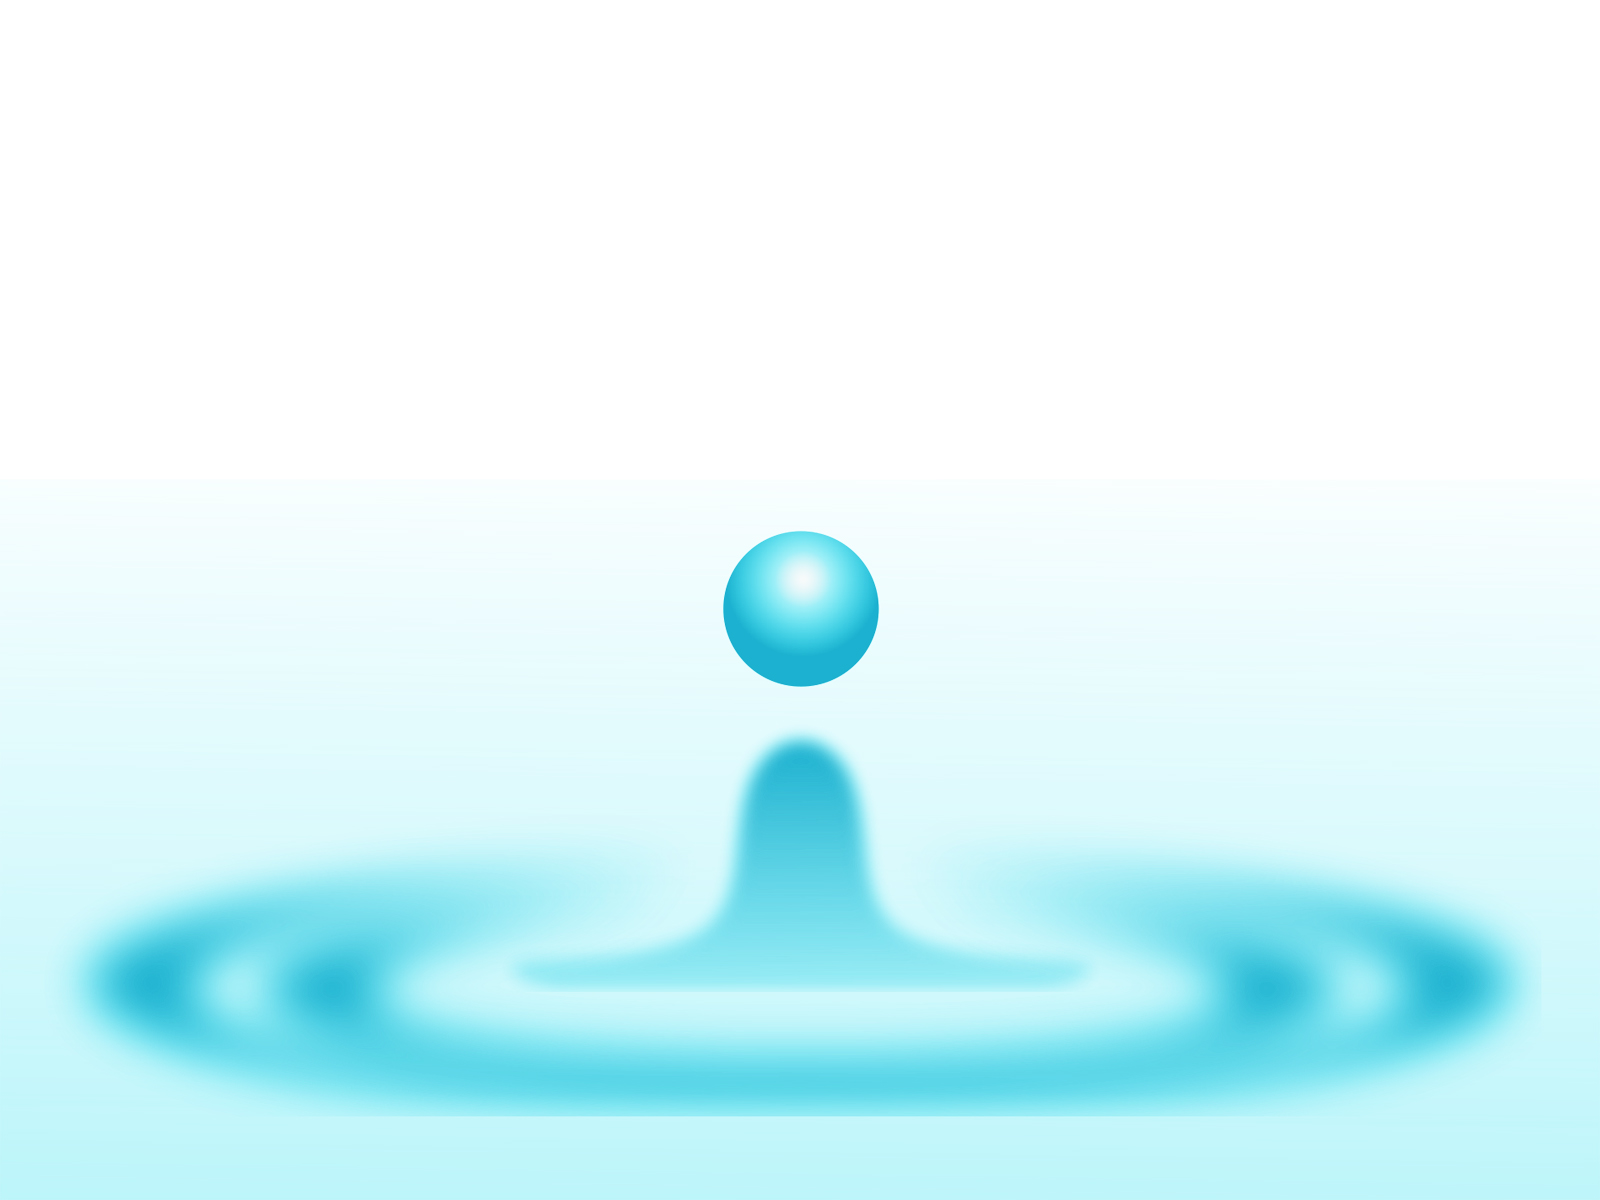 PPT Backgrounds Templates: Water Drop PPT Backgrounds